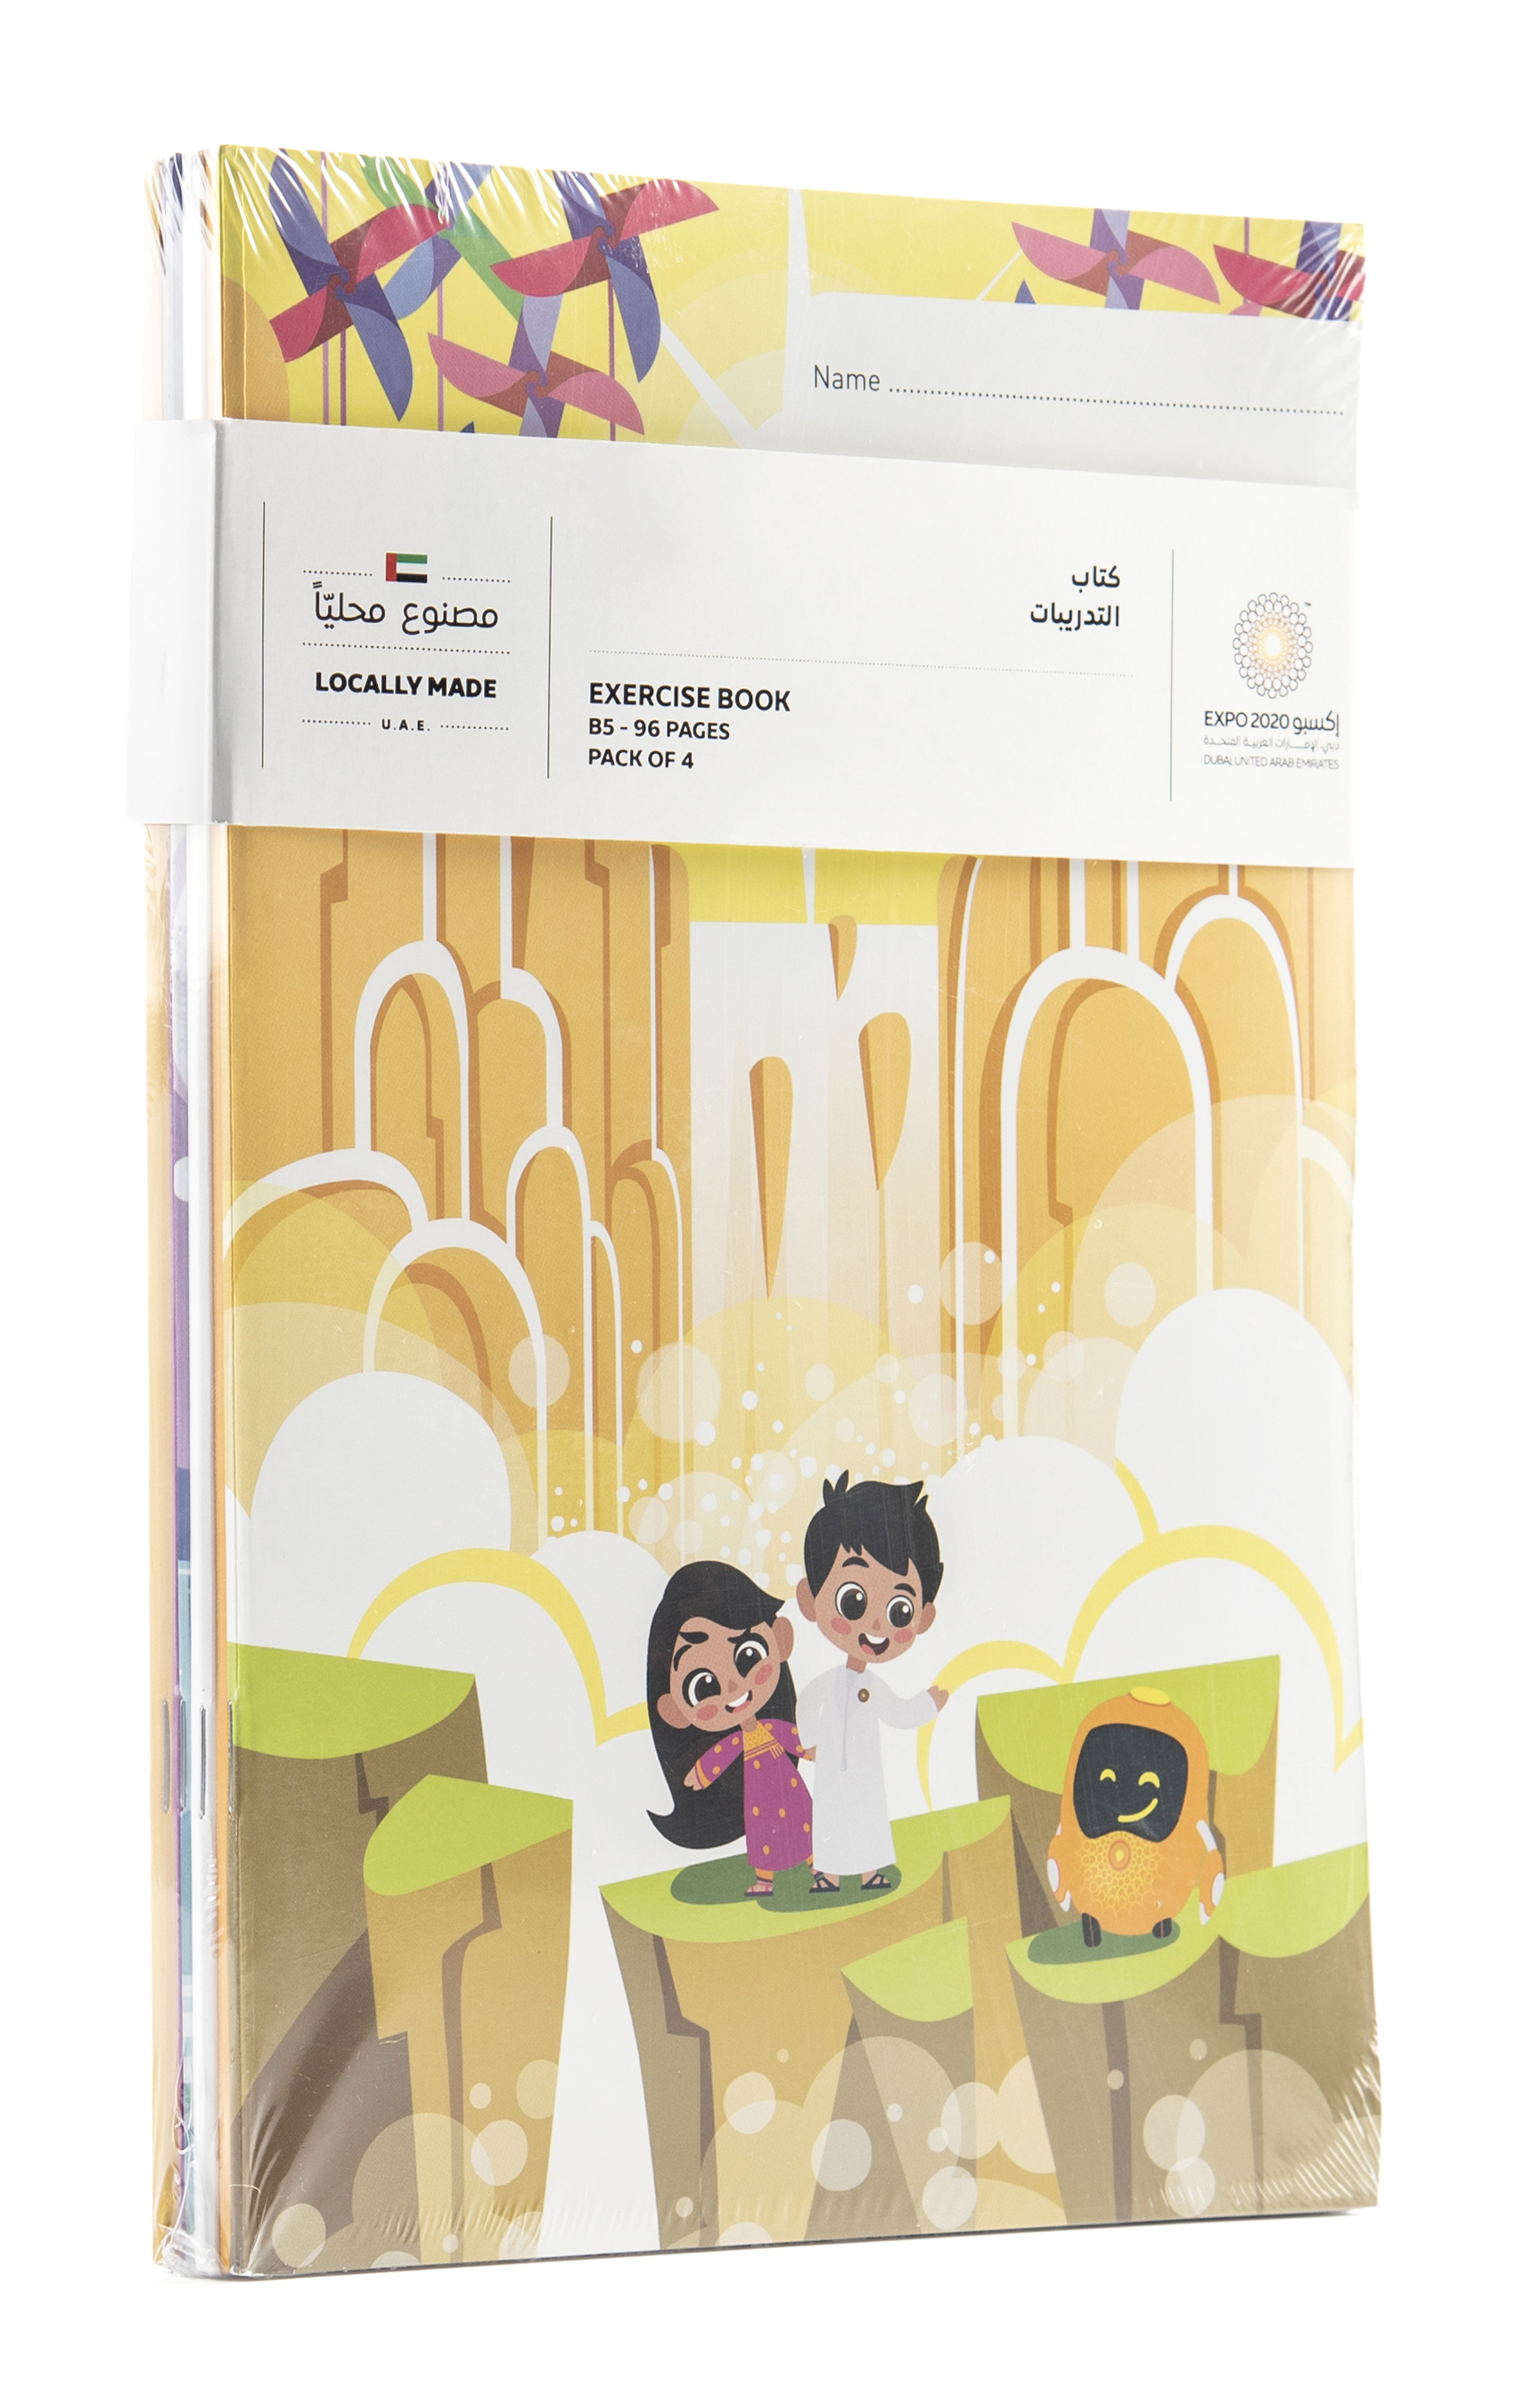 Expo 2020 Dubai Mascots B5 Exercise Books Pack of 4 - 96 Pages